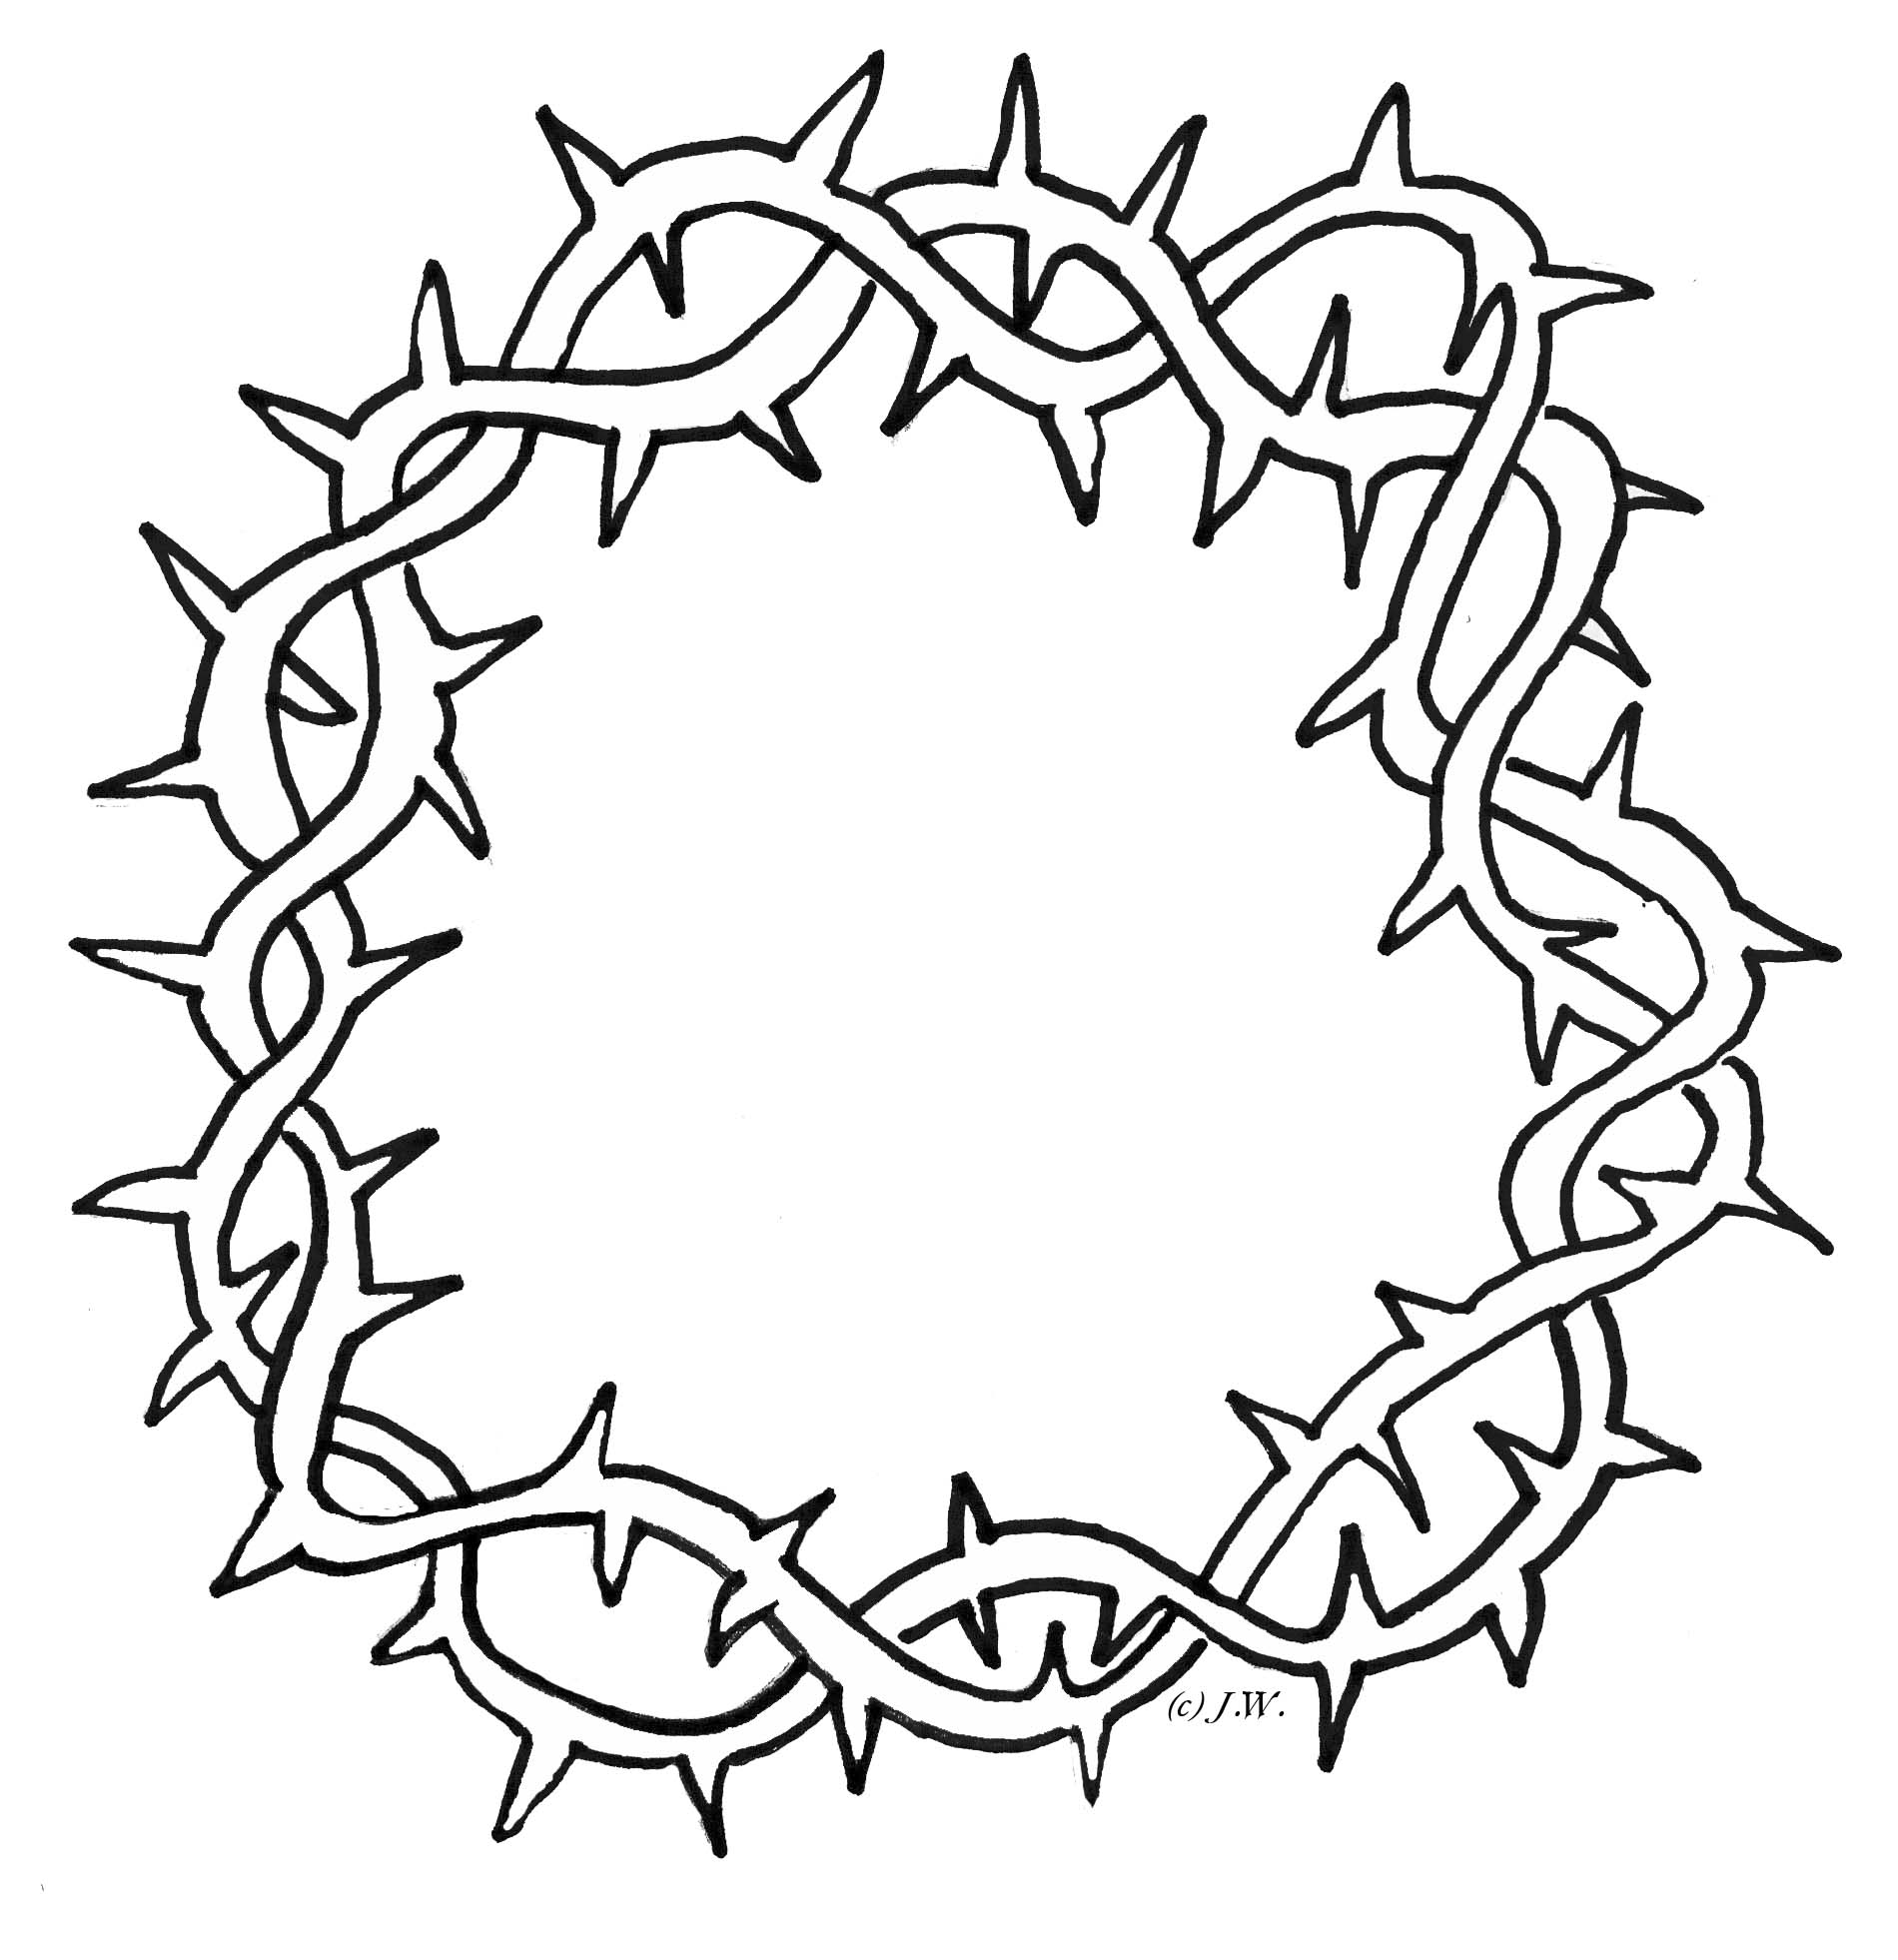 Category: Crown Of Thorns - Sanctus Simplicitus - Clipart library 